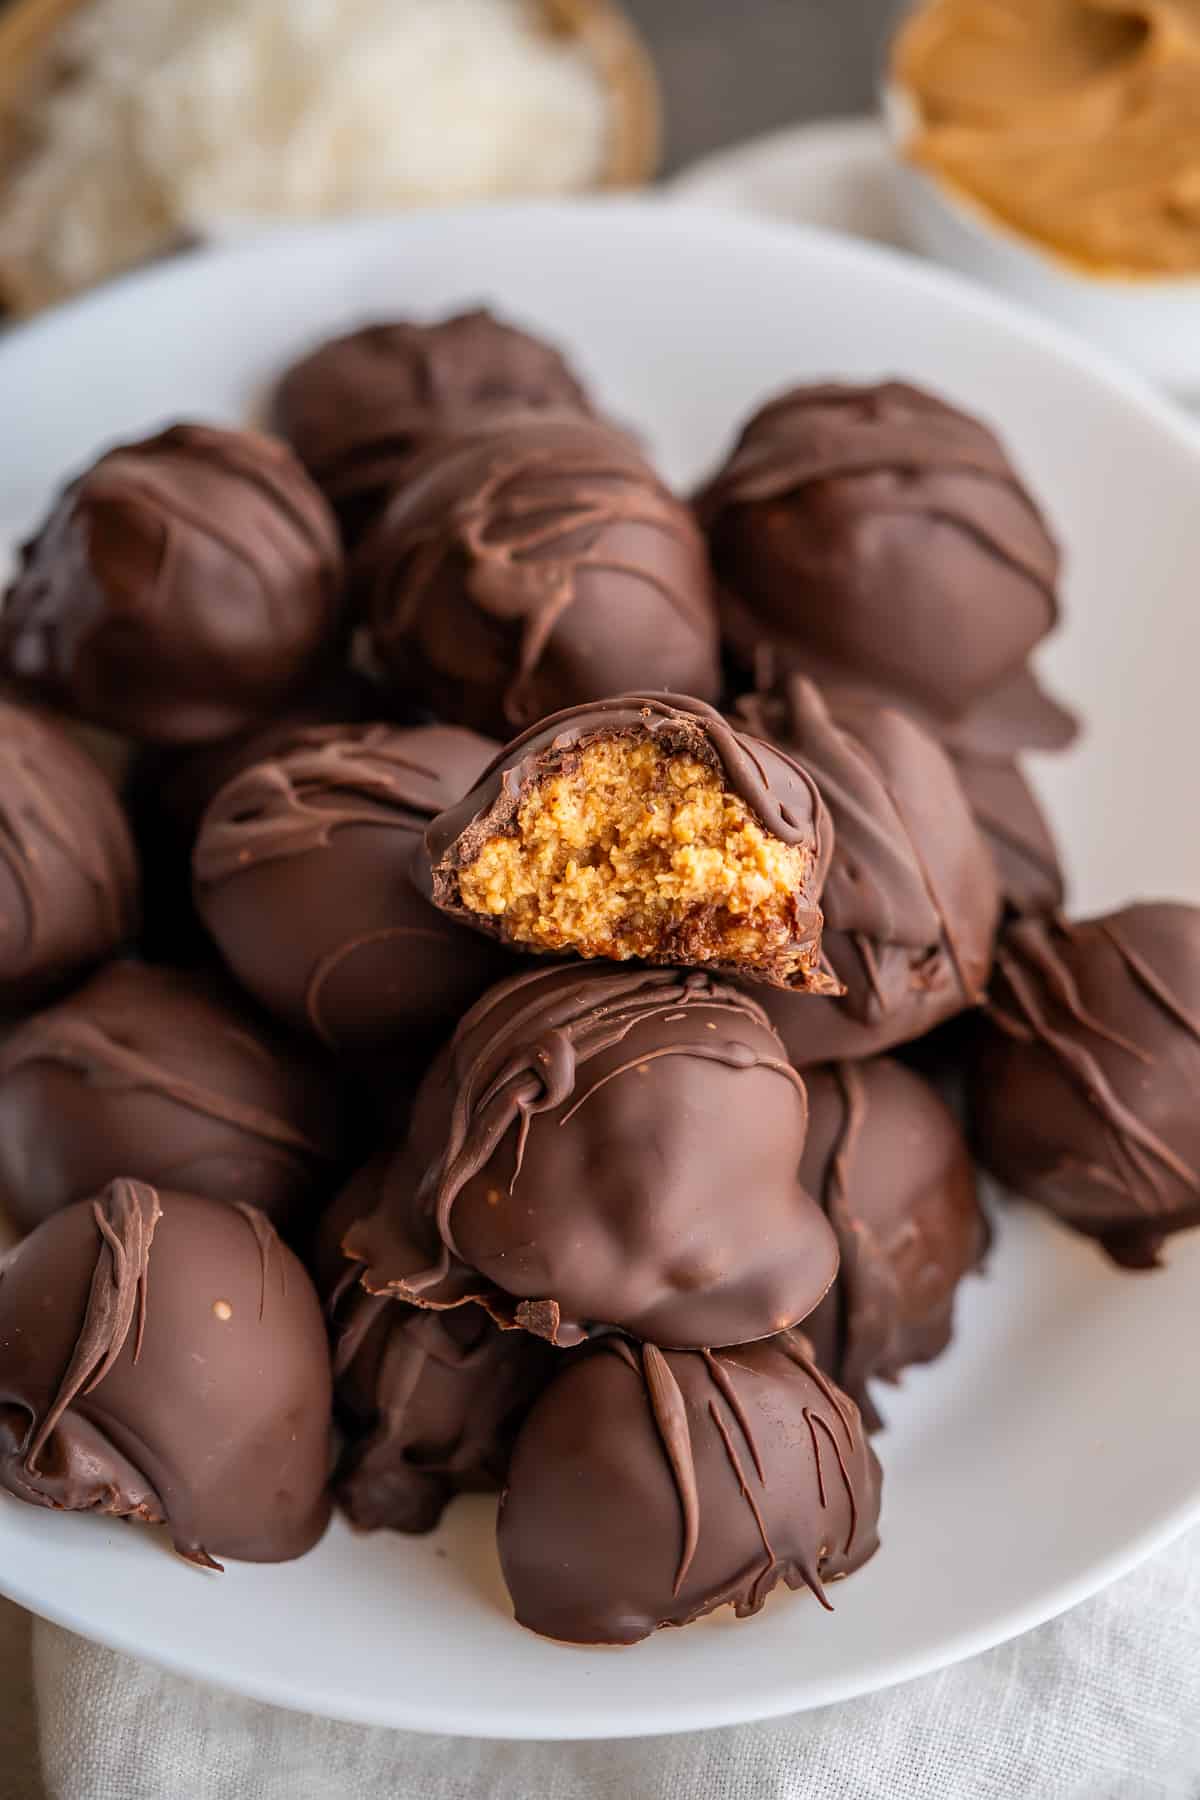 Half of a healthy peanut butter ball to show the inner filling texture and chocolate shell.